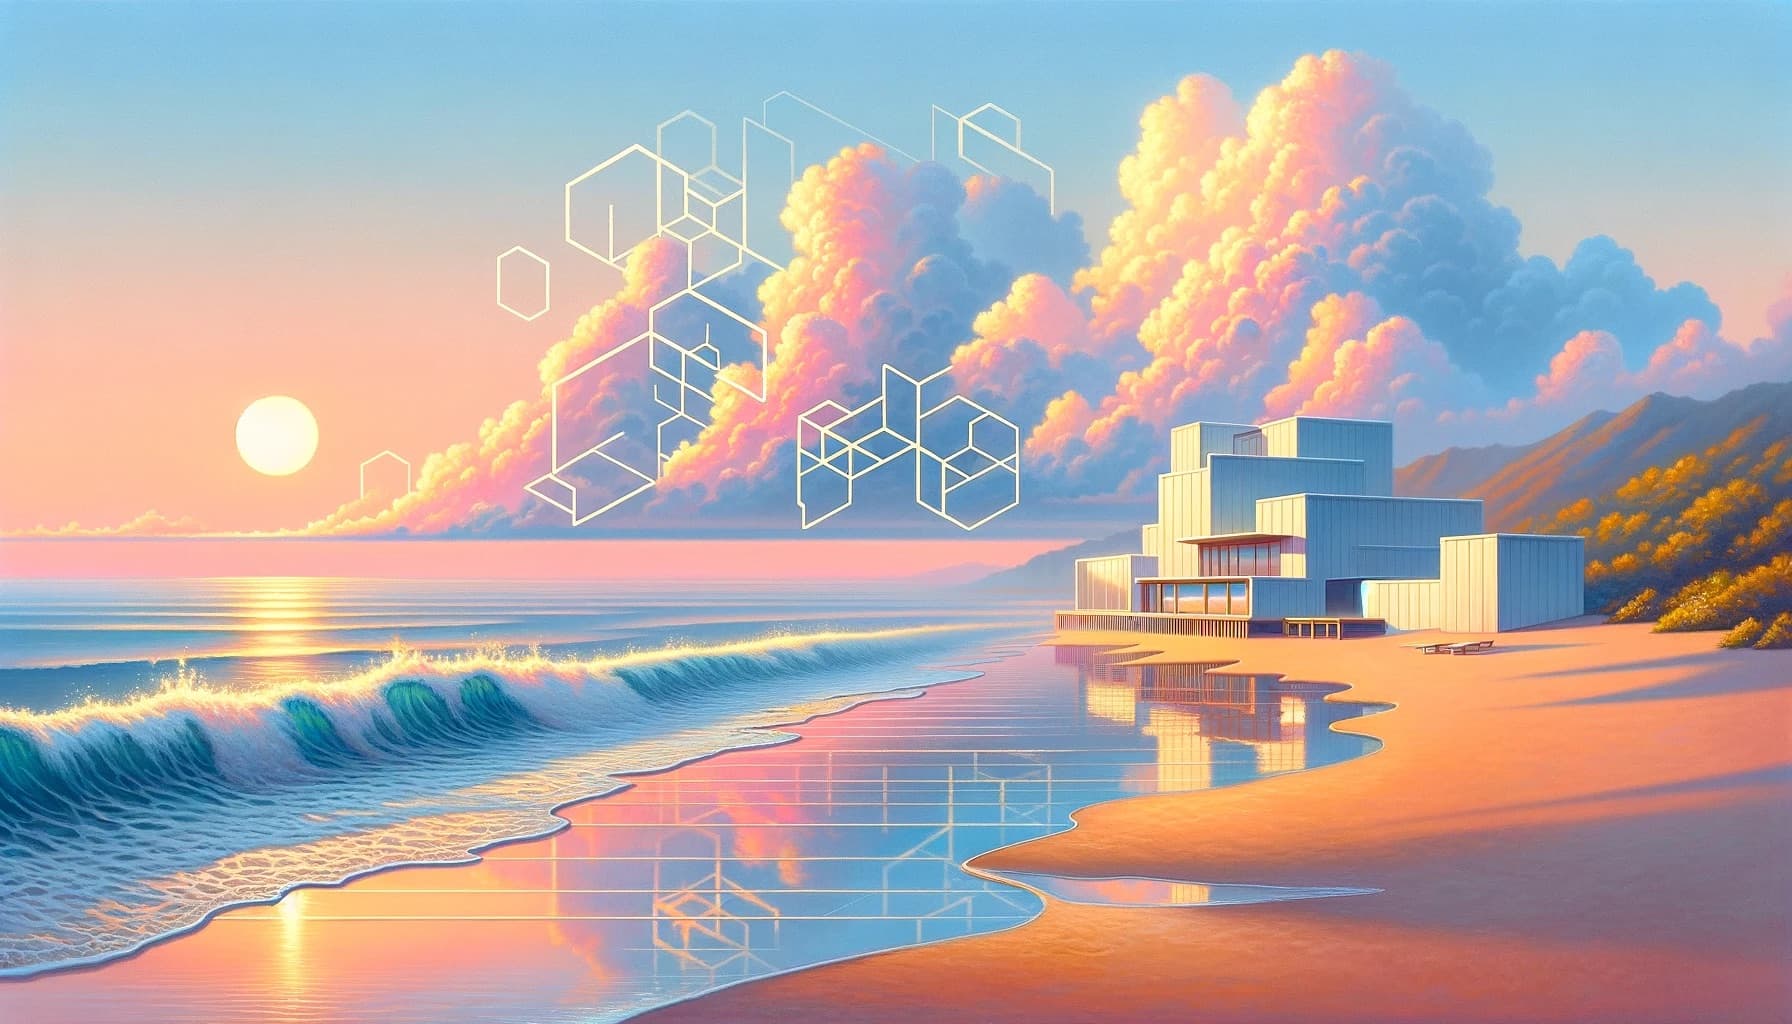 Cover image representing 'zkSNARKs & zkSTARKs: A Novel Verifiable Computation Model'. A modern architectural structure on a tranquil beach with a circuit diagram overlaid on the sunset, encapsulating the fusion of Zero-Knowledge proofs and blockchain technology, signifying the clear, logical, and systematic approach to privacy and security in decentralized applications.